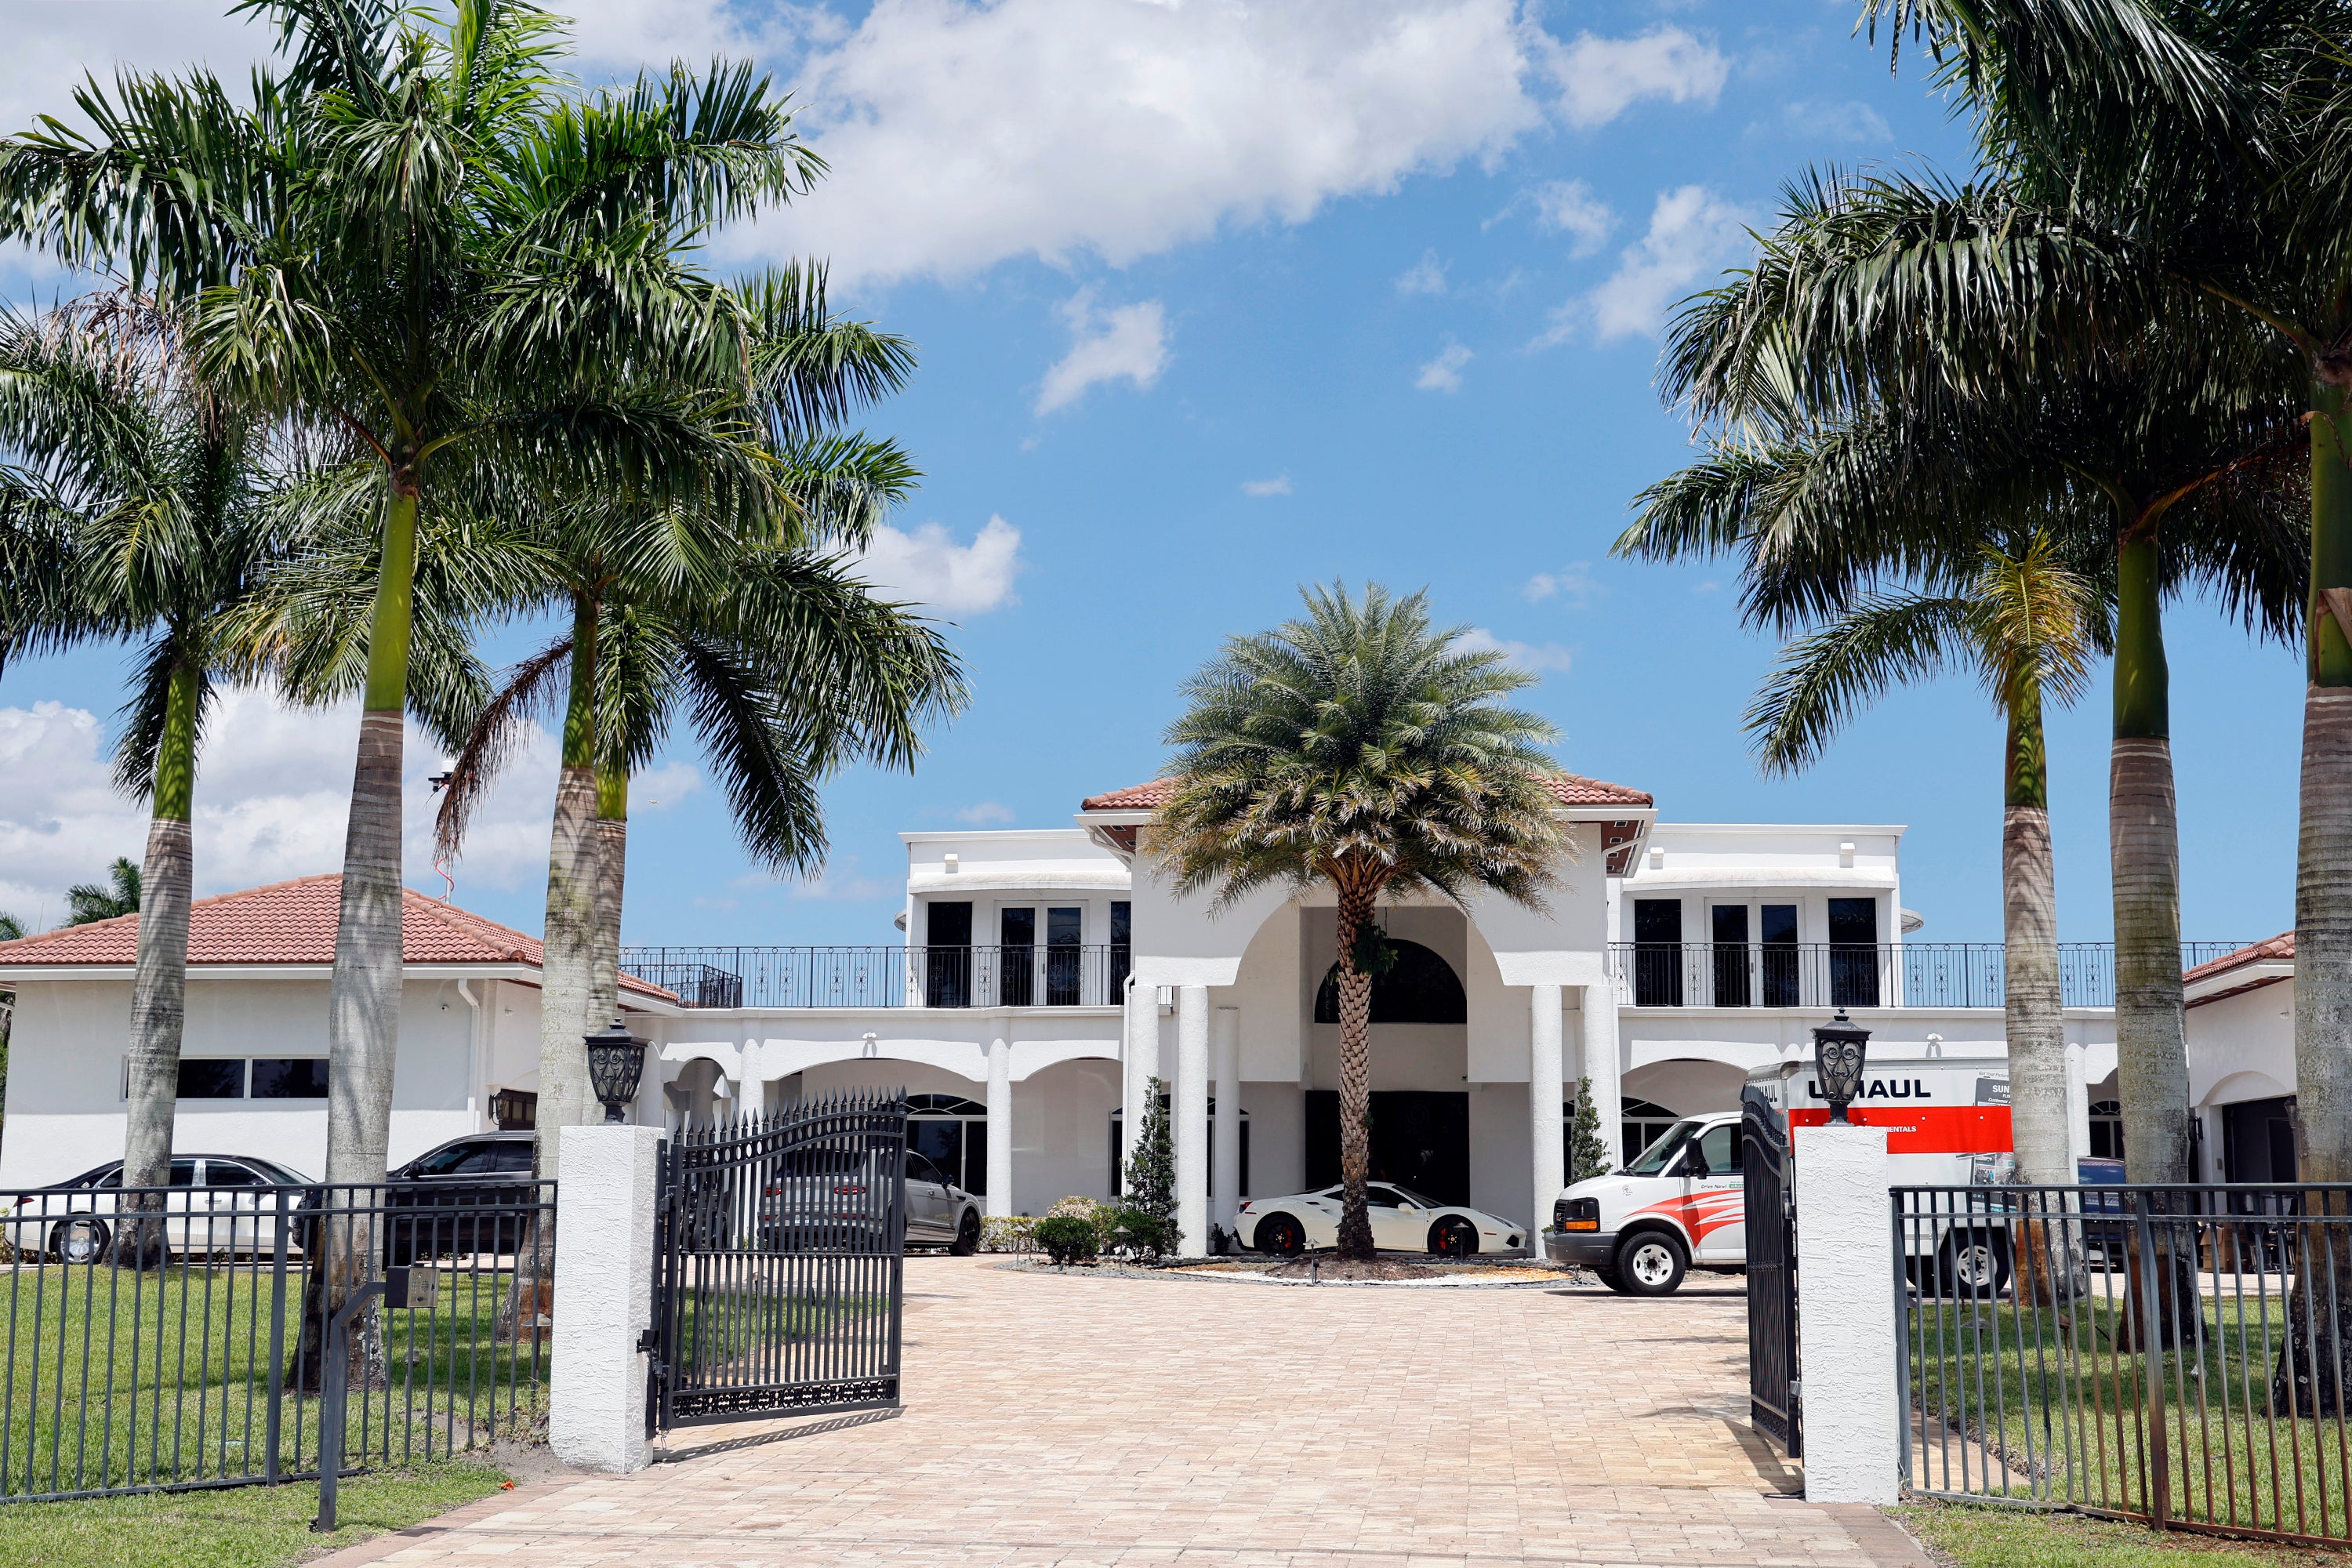 Sean Kingston's Southwest Ranches home is shown during a raid by the Broward Sheriff's Office